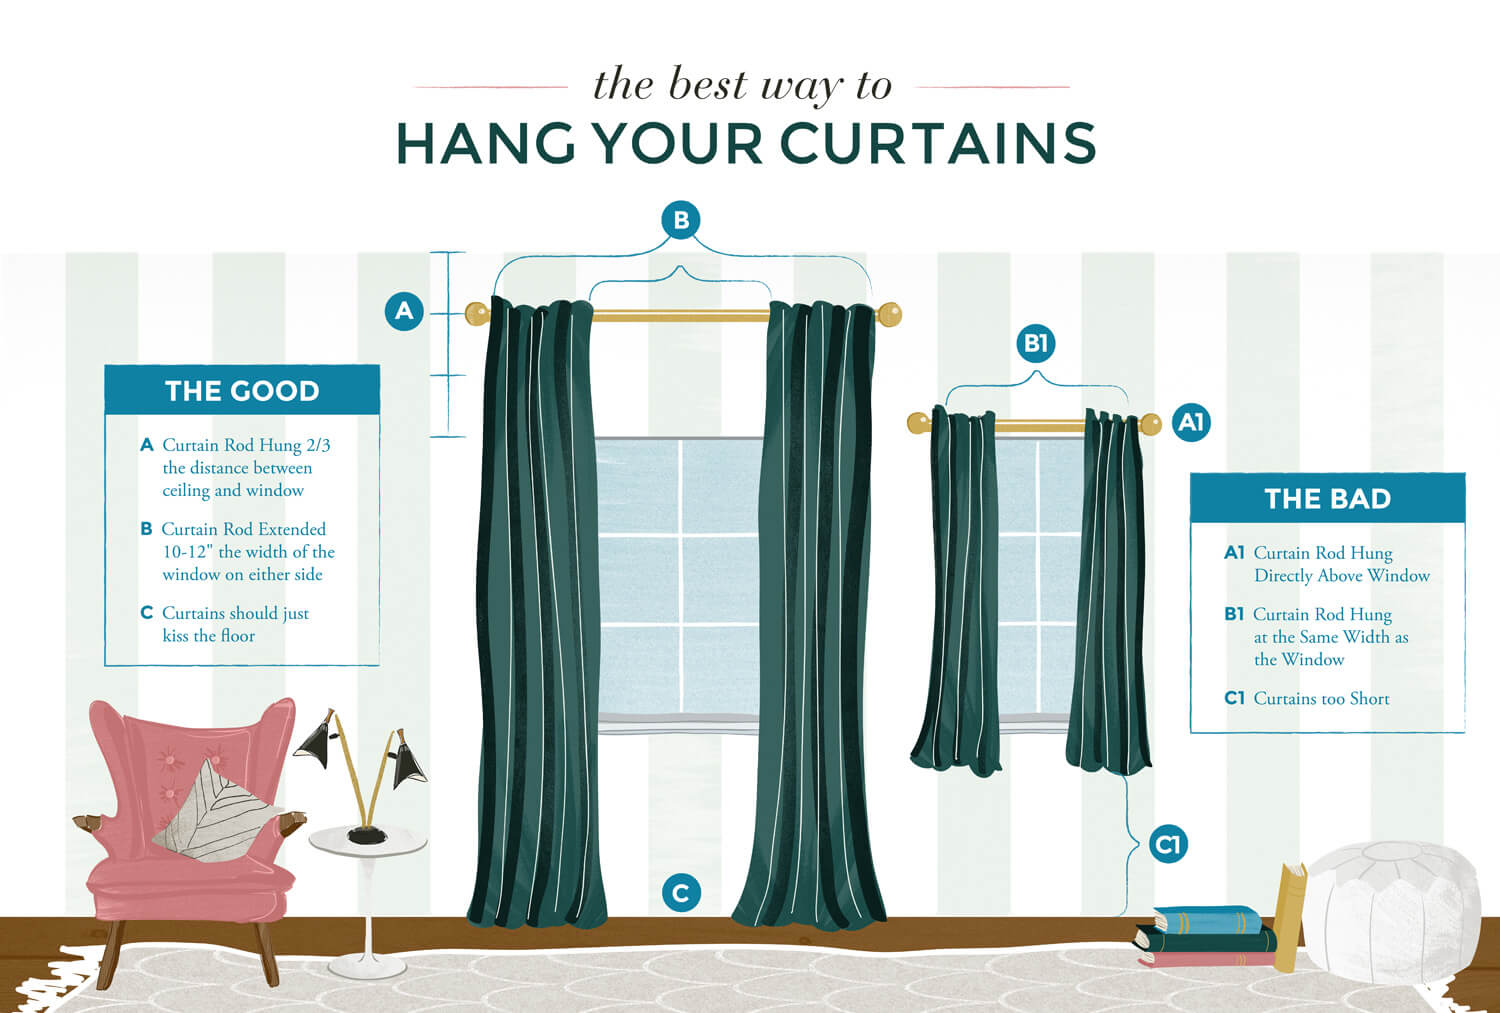 Our Home Diy Guide How To Hang Your Curtains Like A Pro Space Shack,Paint Color Ideas For Bedroom Walls For Girls